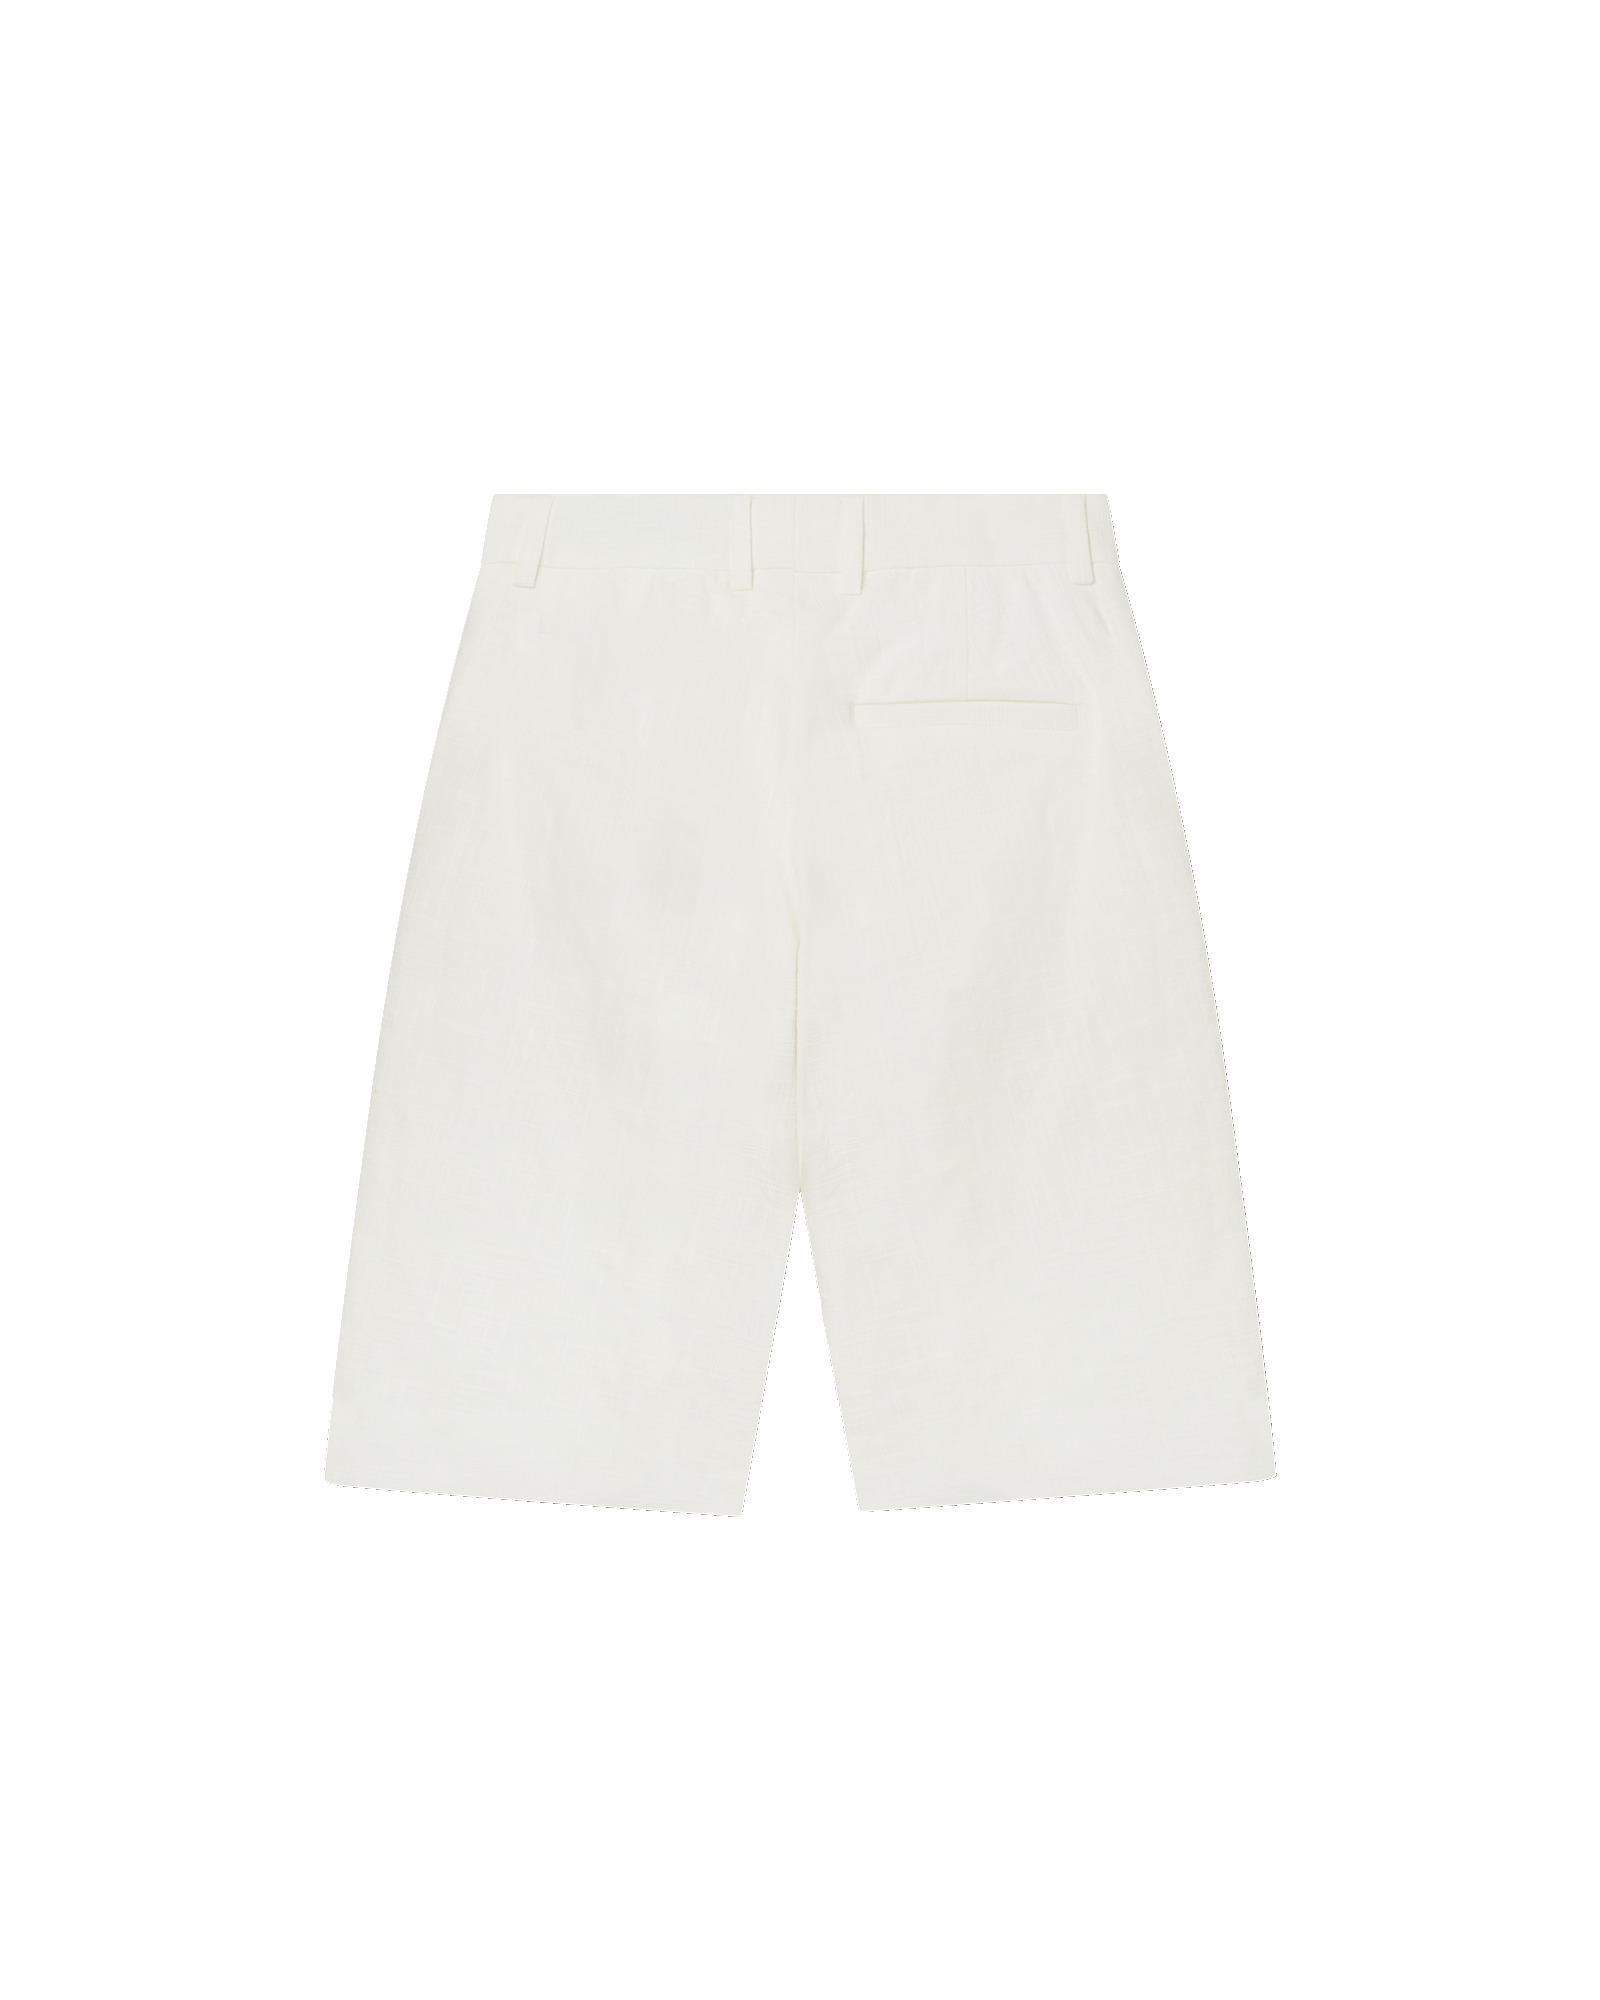 Off-White Tailored Shorts - 5